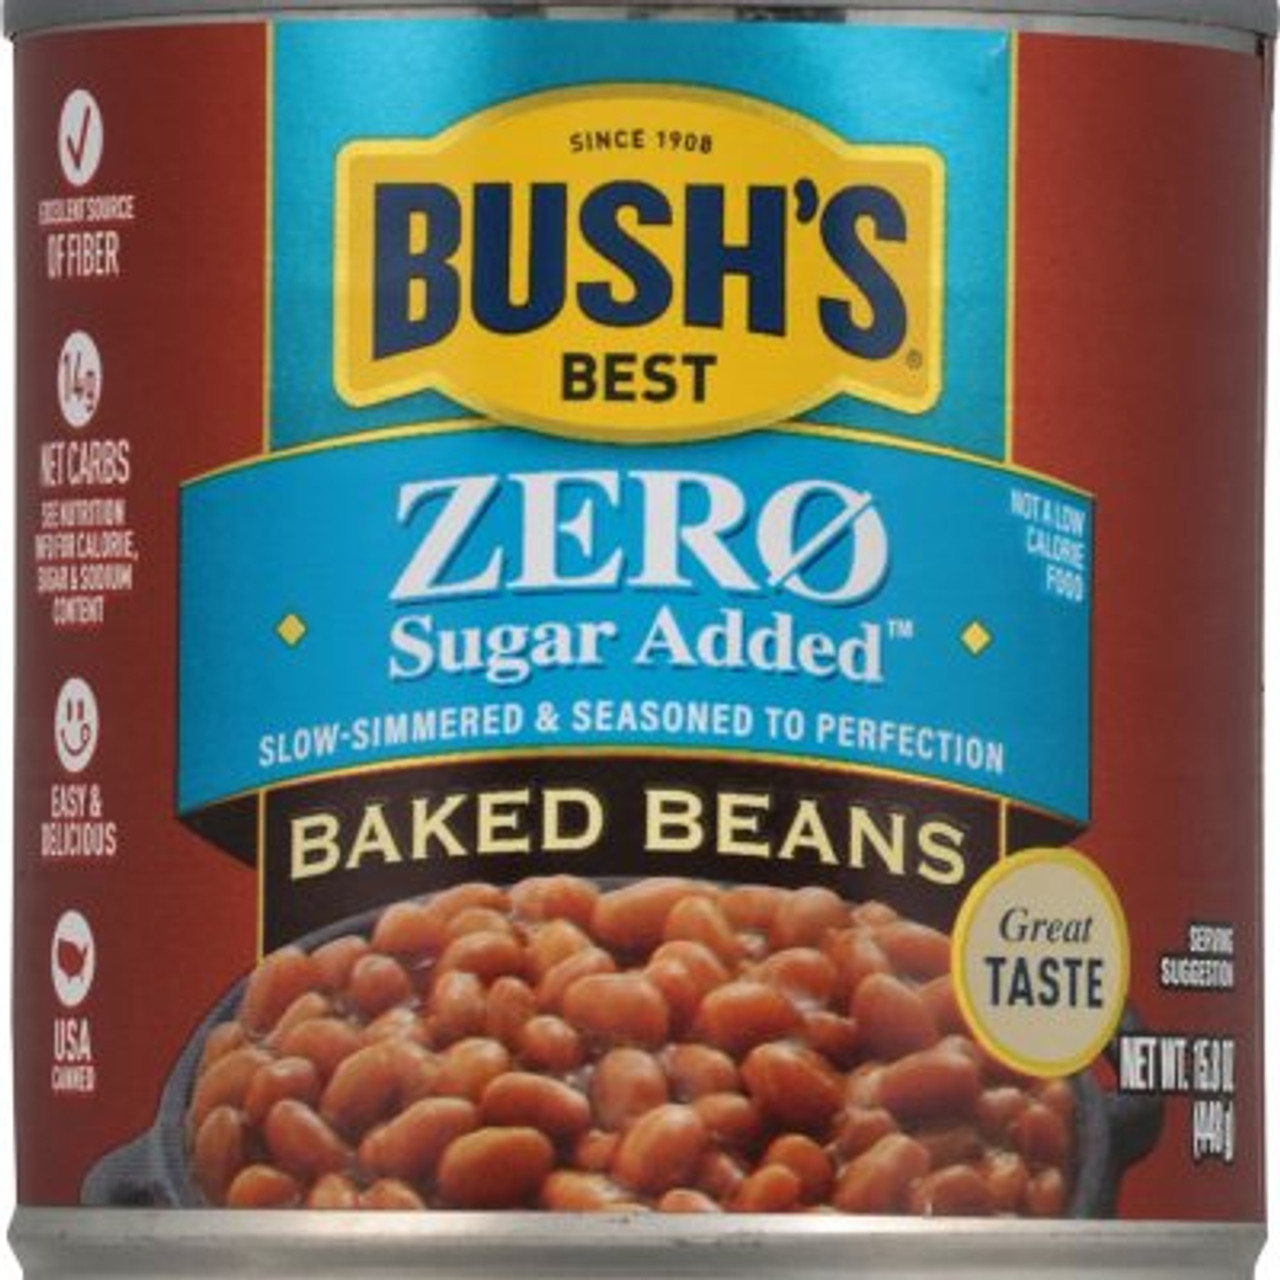 Bush's Zero Sugar Added Baked Beans (15.8 oz, 6 pk.) - [From 53.00 - Choose pk Qty ] - *Ships from Miami